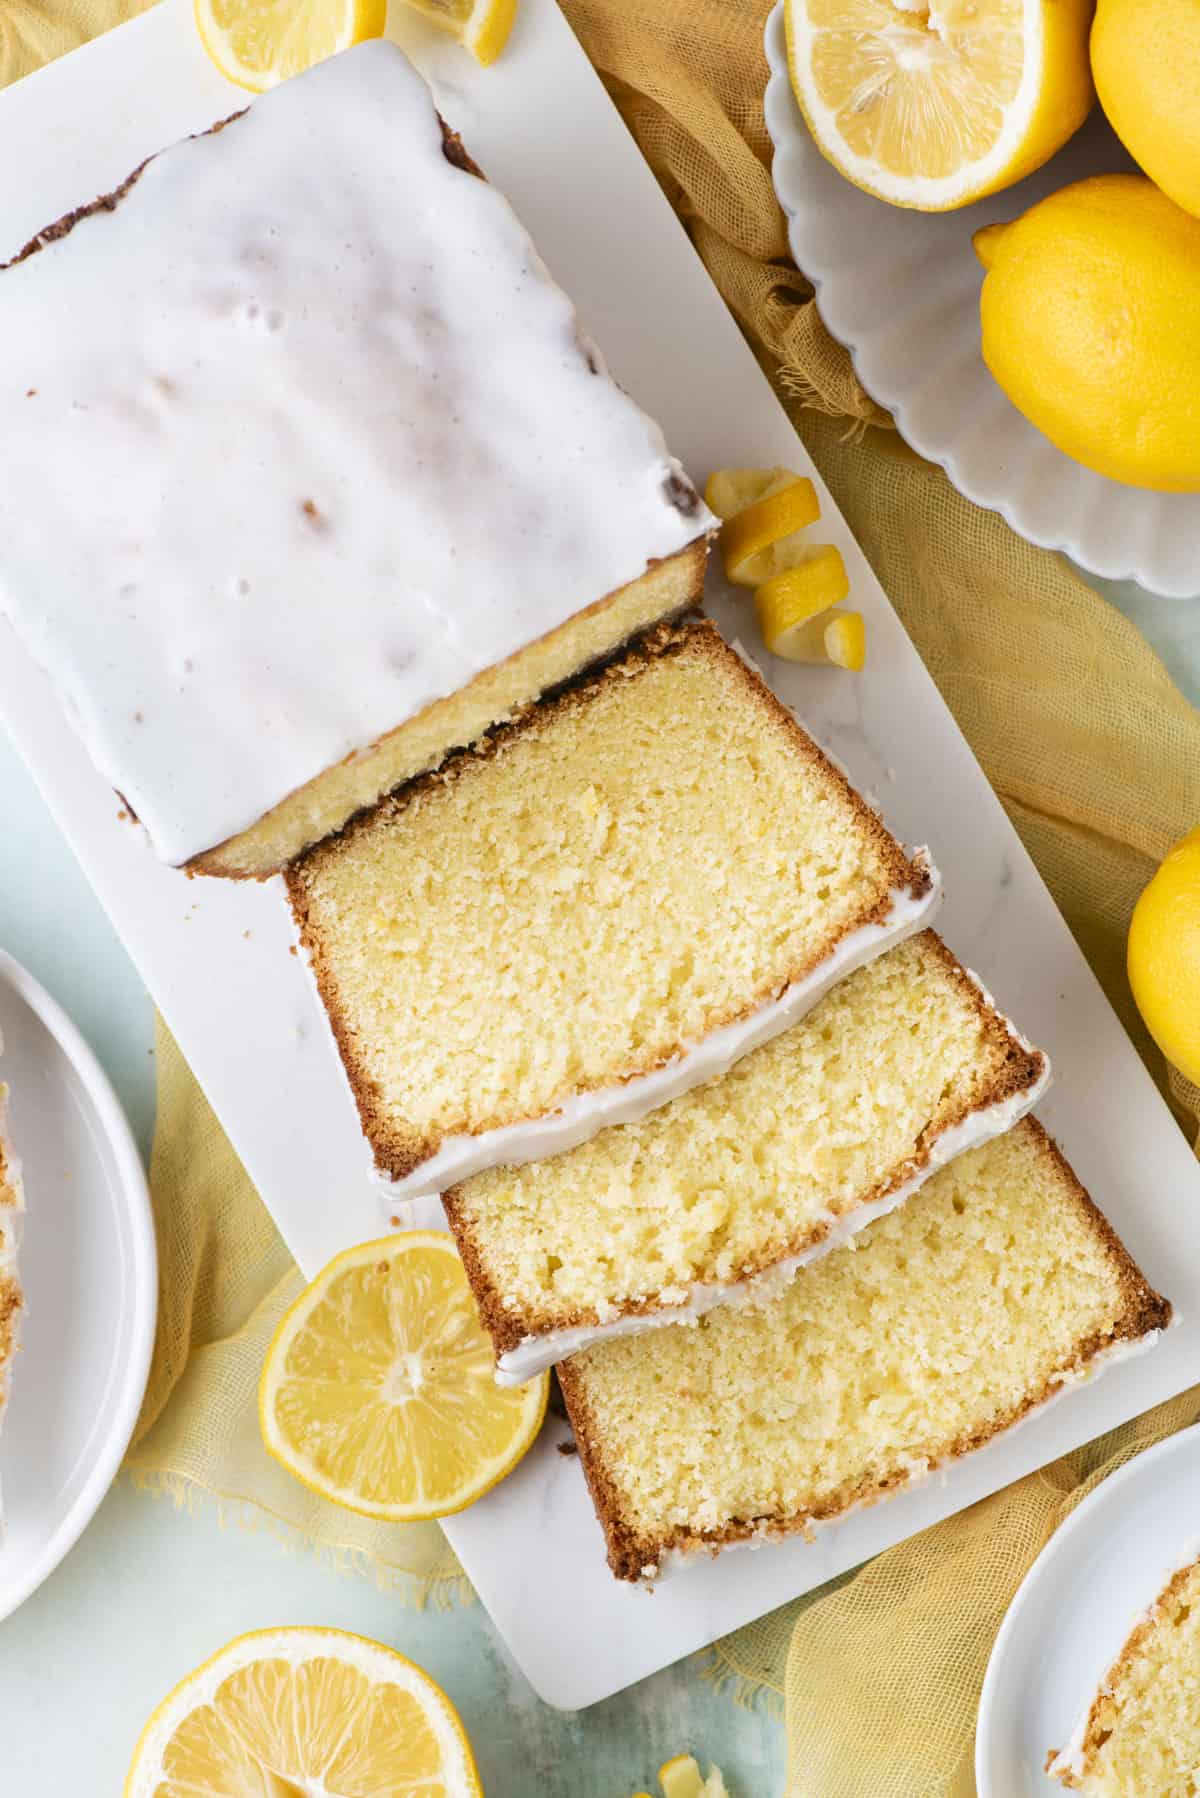 over head view of lemon pound cake, half sliced on a white cutting board surrounded by a bowl of lemons and lemon slices and peels scattered around